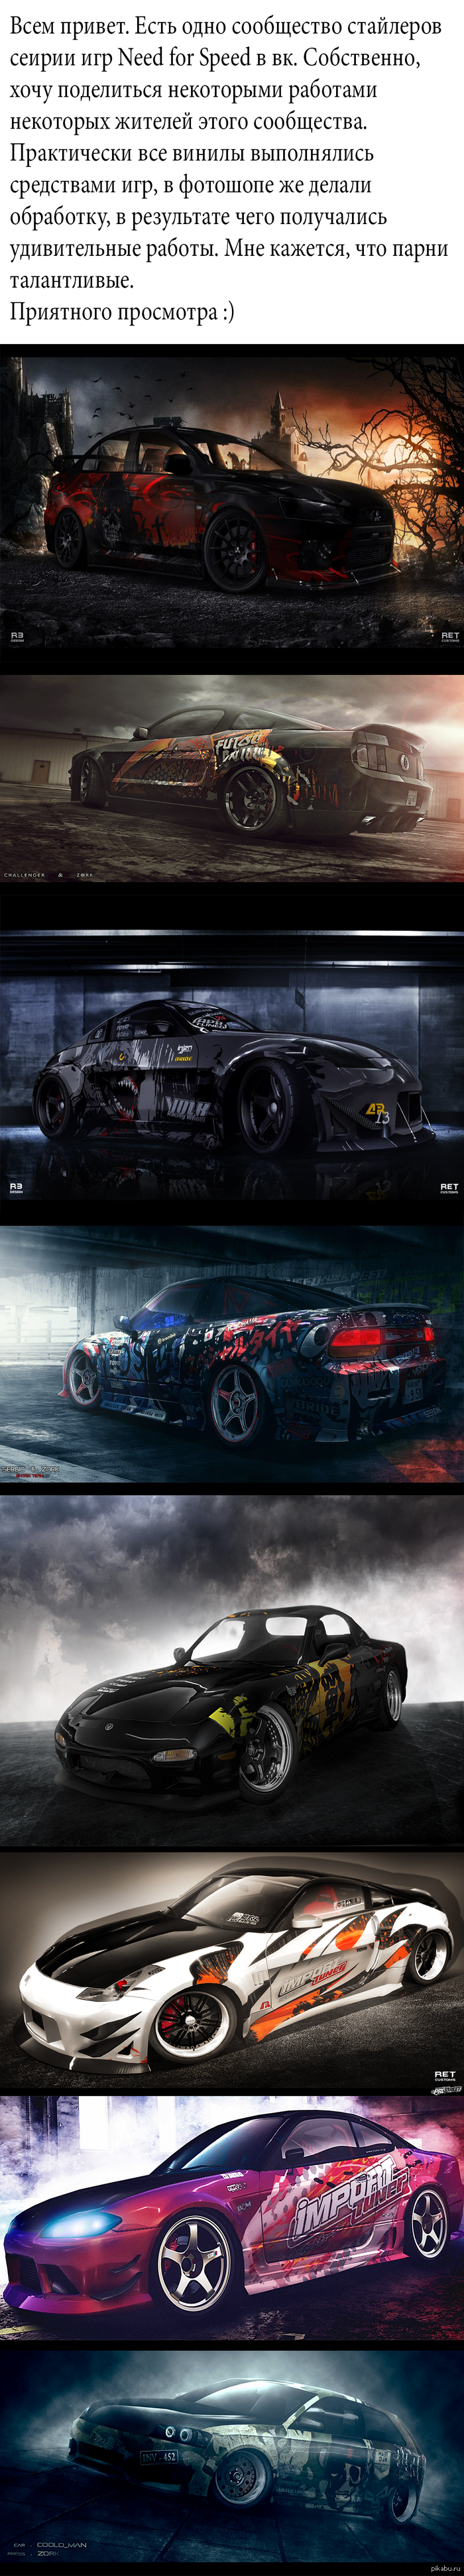       Need for Speed ()  ,    )